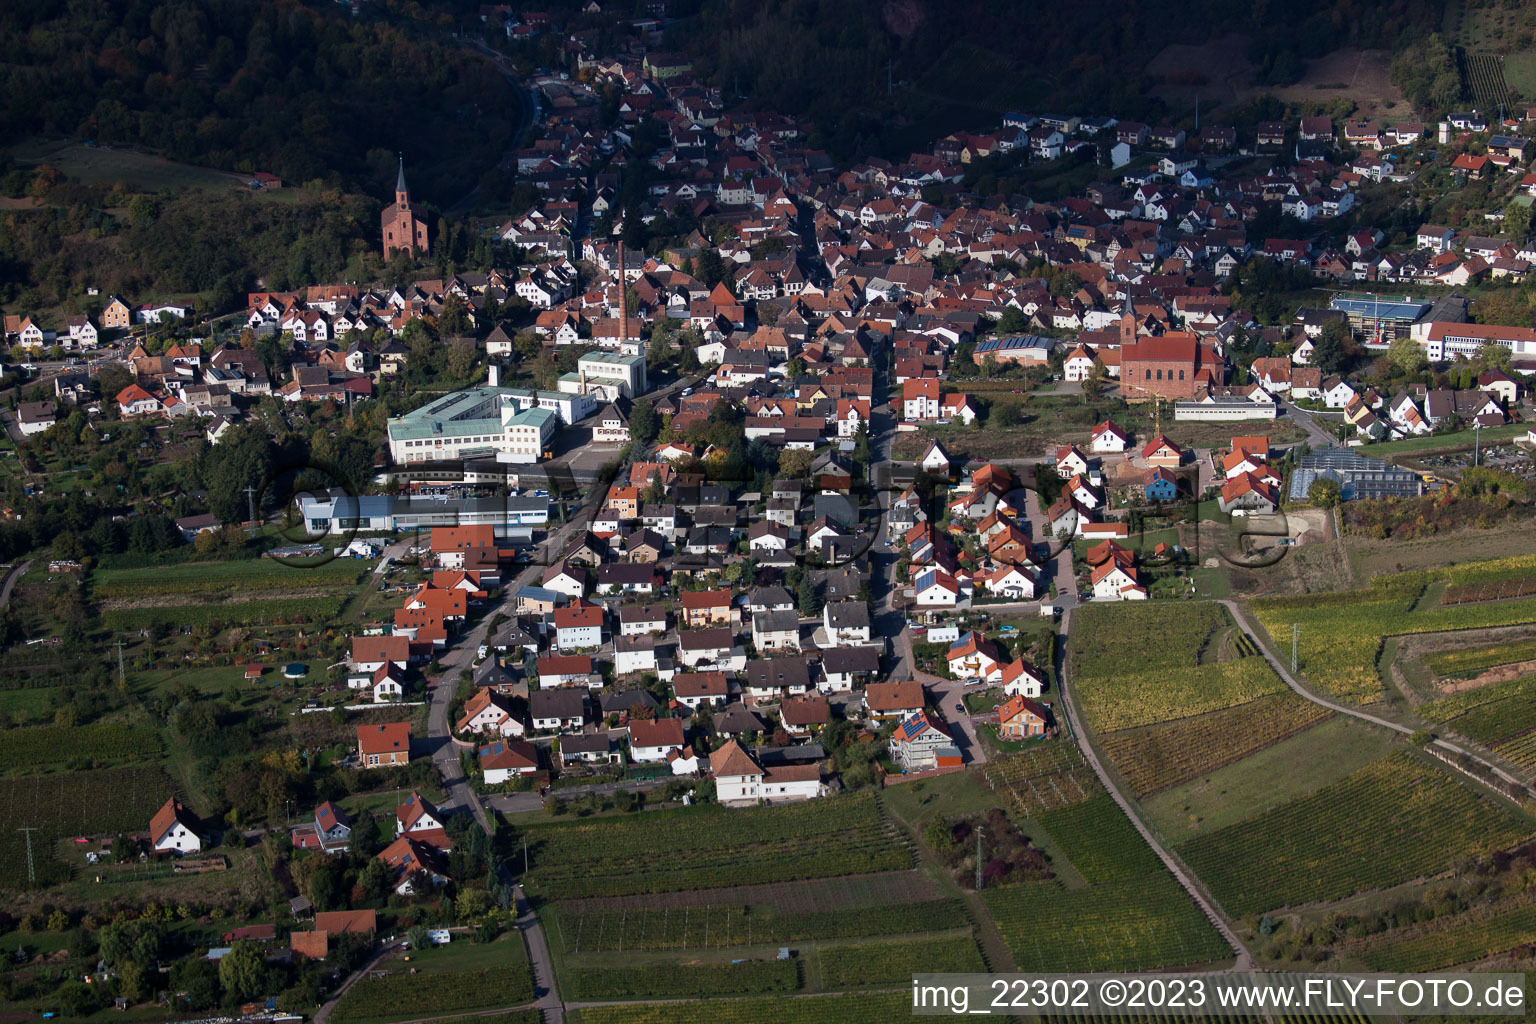 Albersweiler in the state Rhineland-Palatinate, Germany seen from a drone